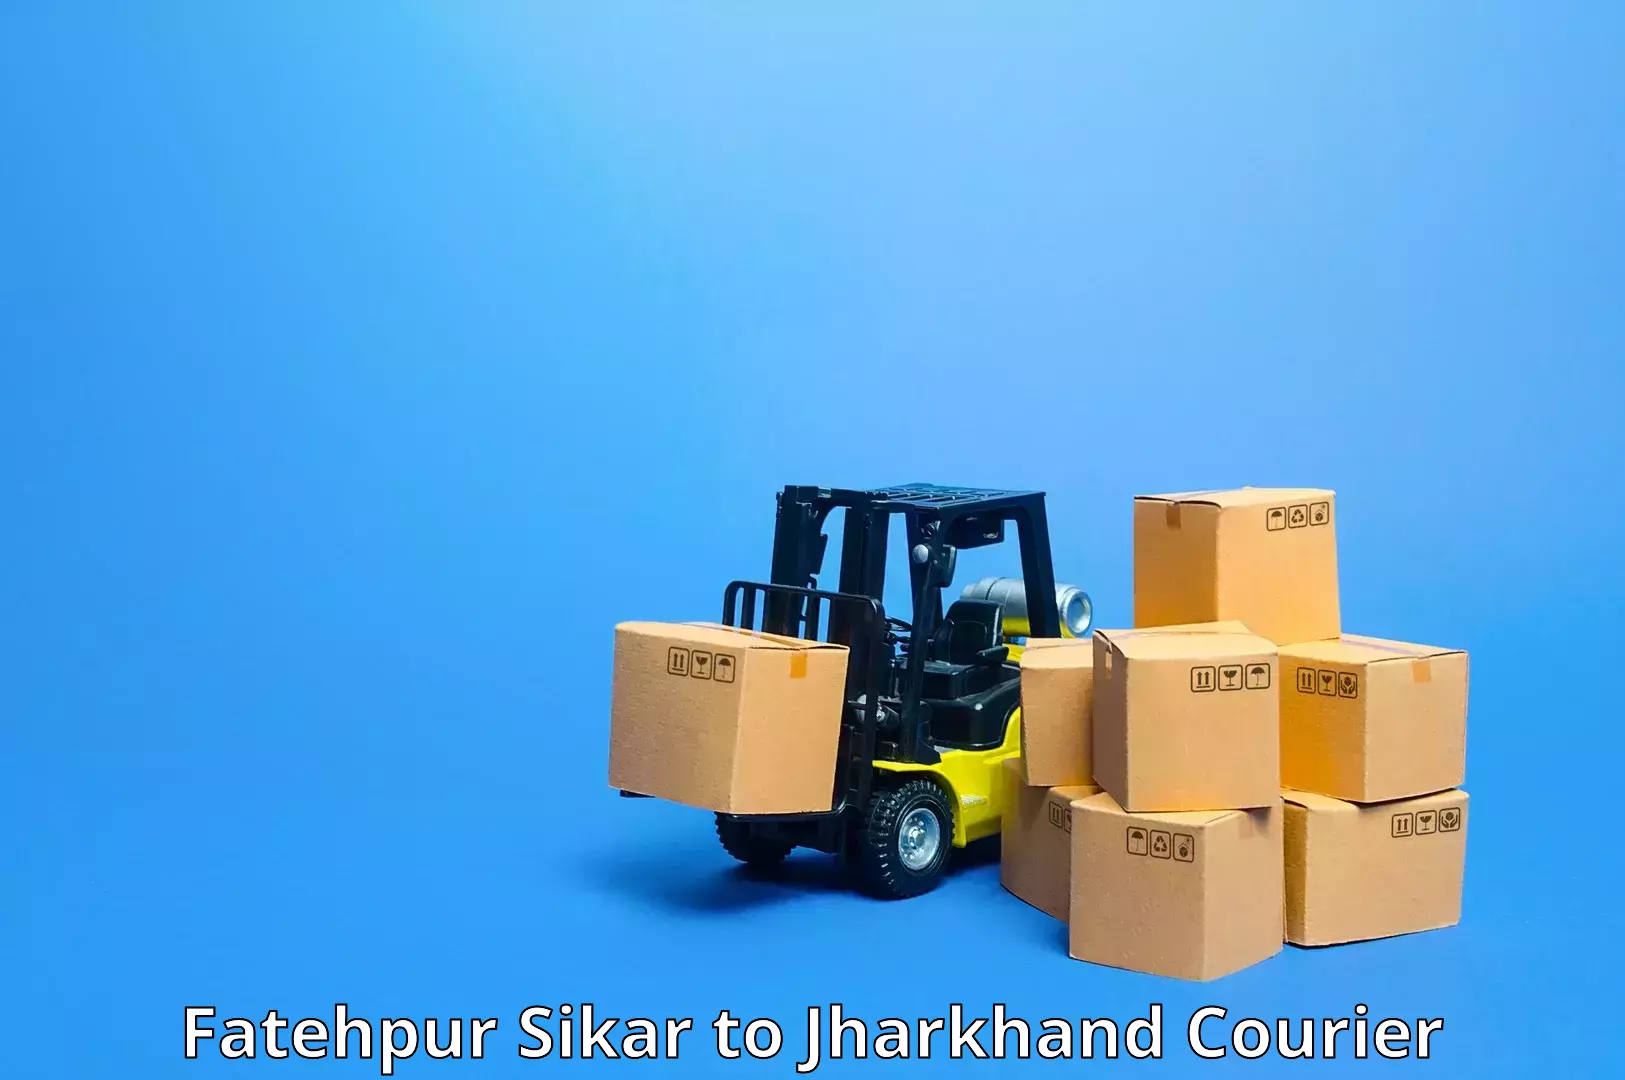 Sustainable shipping practices in Fatehpur Sikar to Peterbar